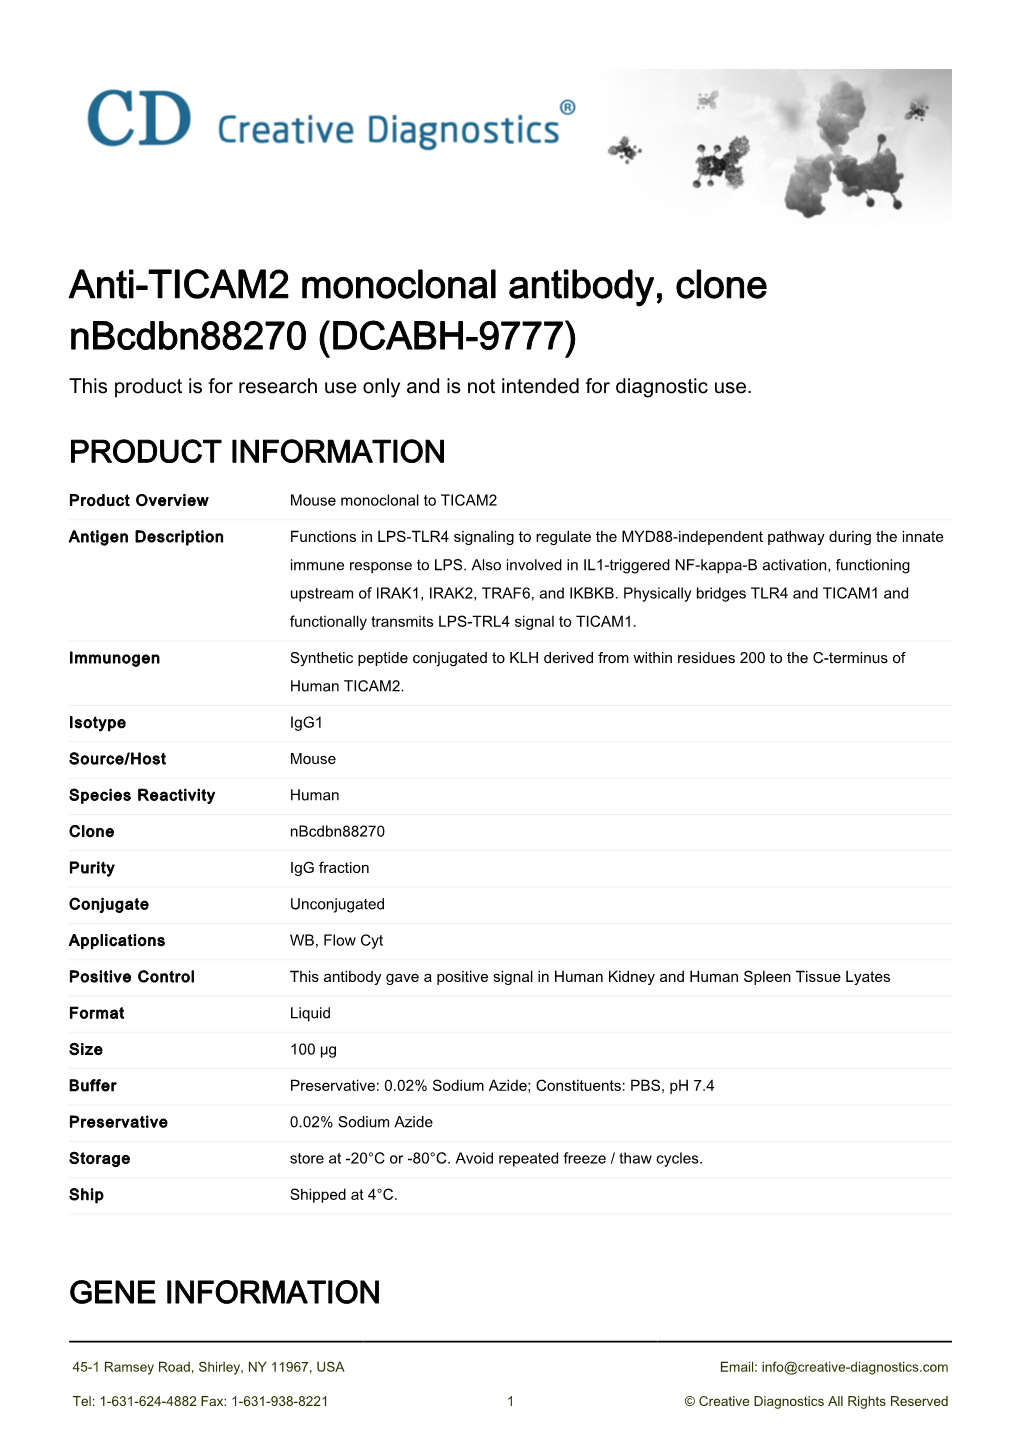 Anti-TICAM2 Monoclonal Antibody, Clone Nbcdbn88270 (DCABH-9777) This Product Is for Research Use Only and Is Not Intended for Diagnostic Use